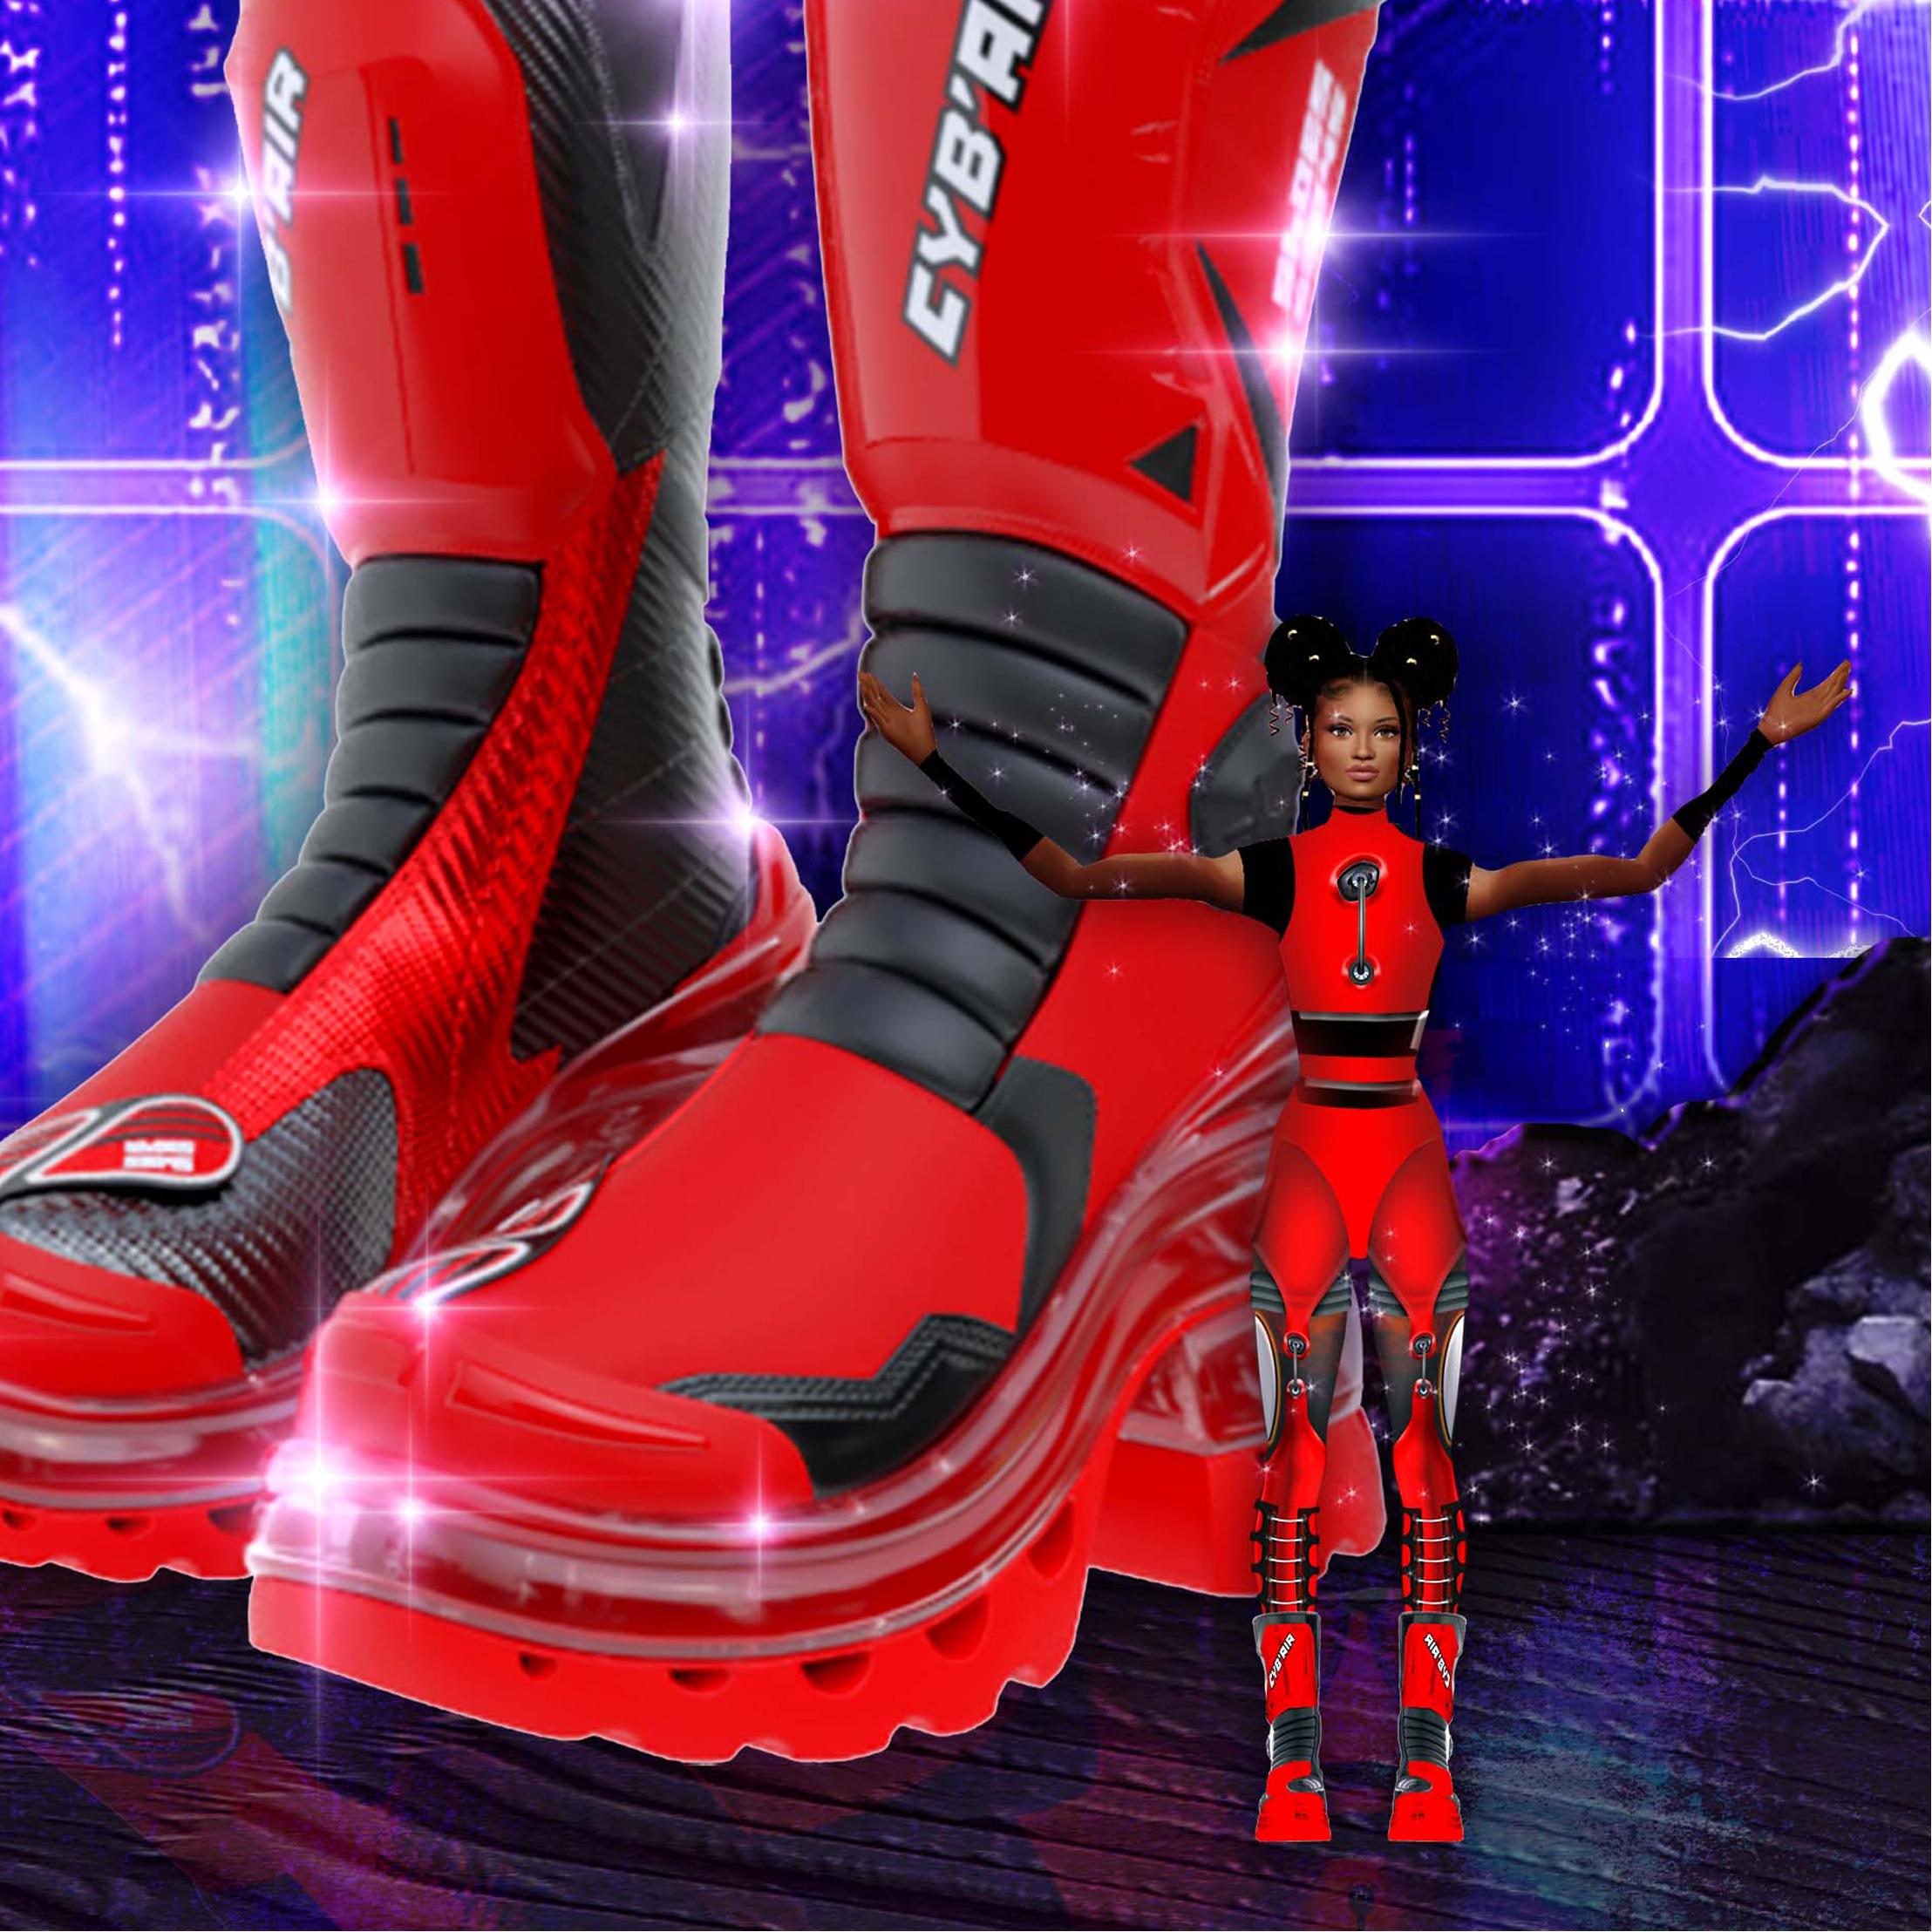 Limited Edition Cyb’Air Lava sneakers in IMVU by SHOES 53045 on THE DEMATERIALISED